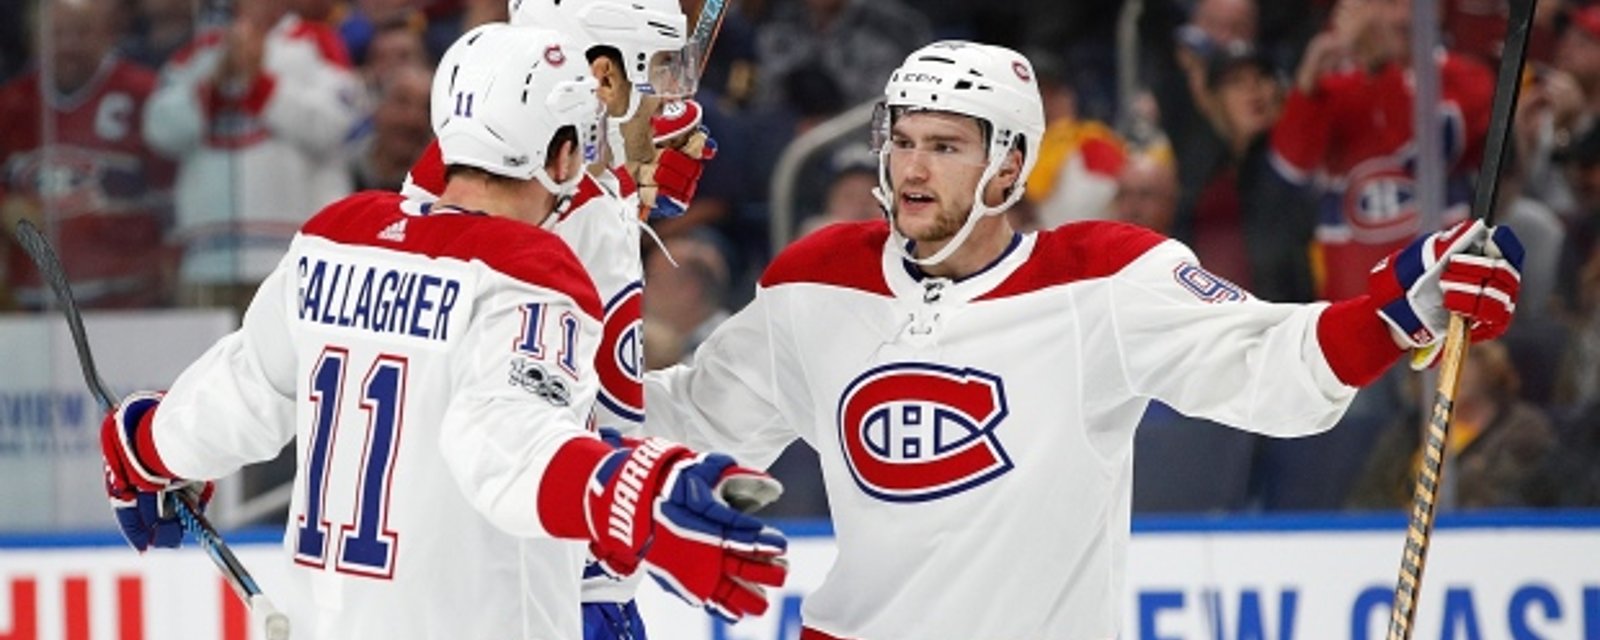 Breaking: Two top players missing at Habs' practice